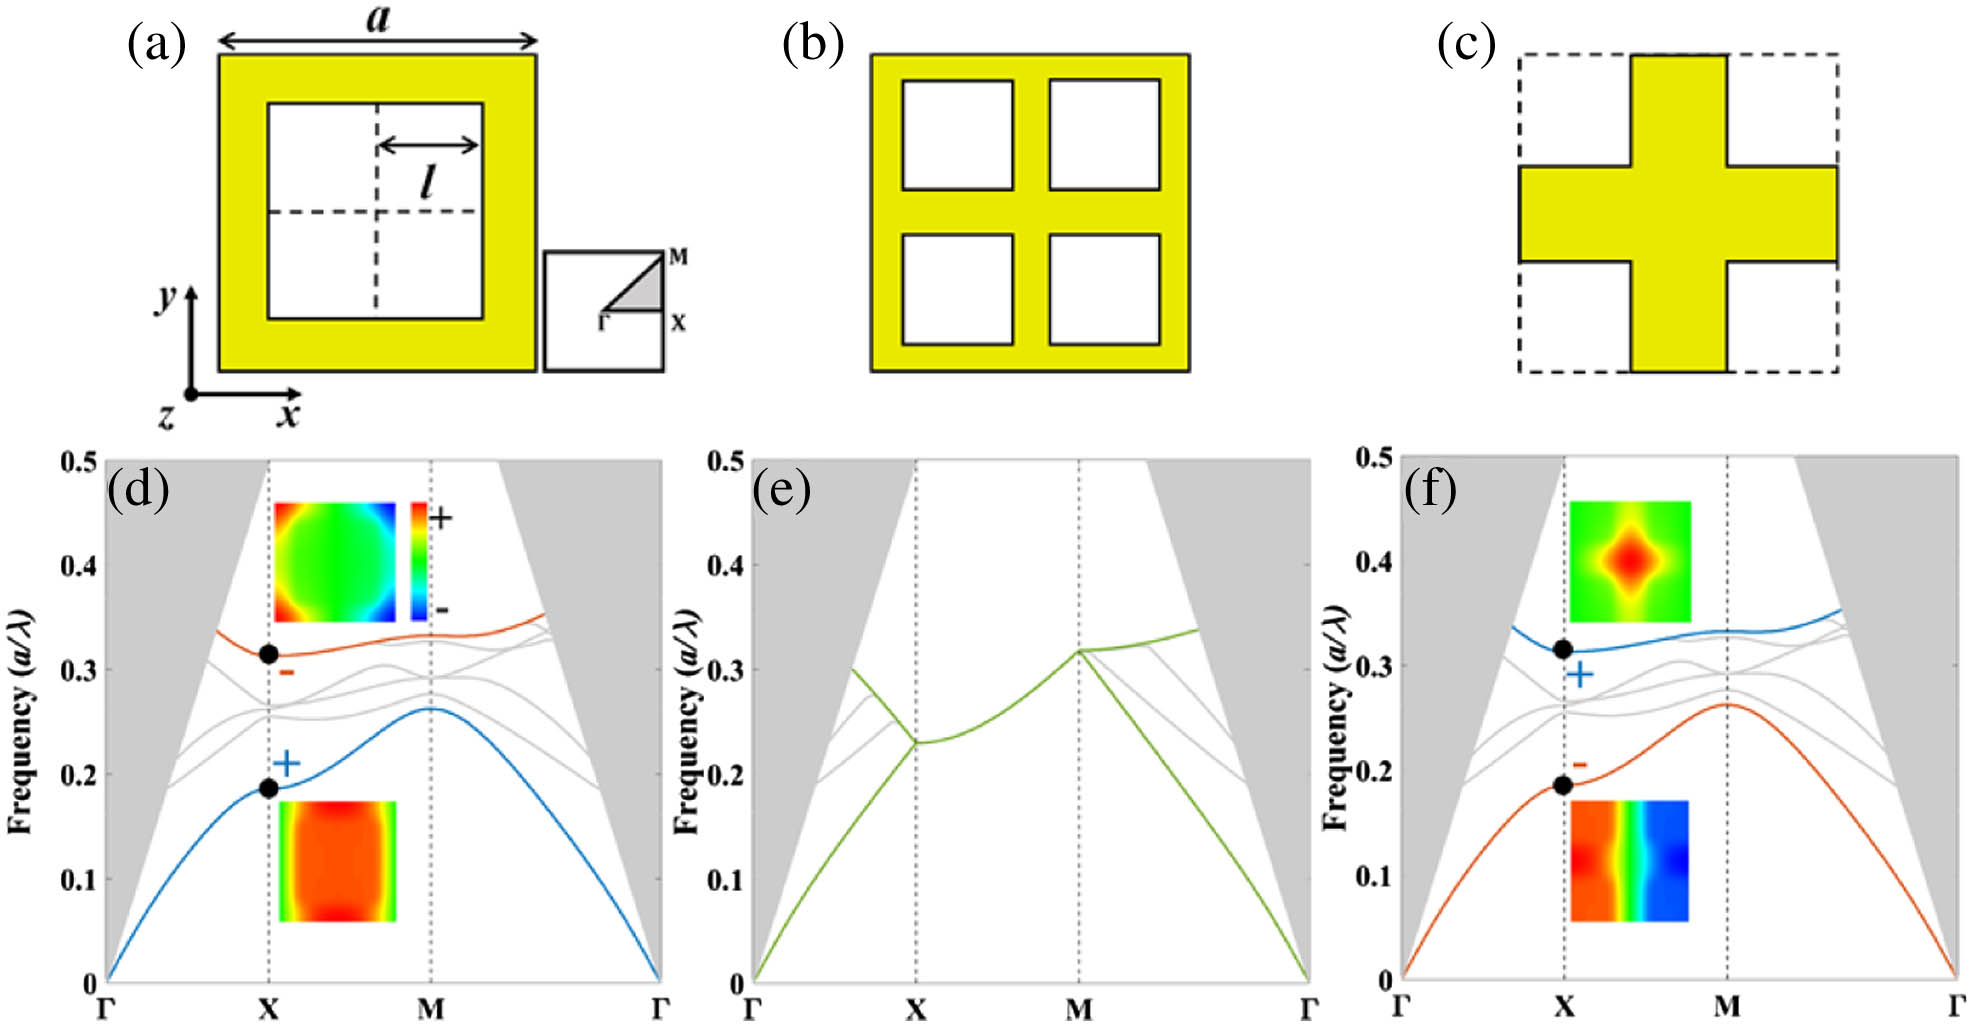 (a)–(c) Schematics of cross sections in the x−y plane for the three unit cells. The yellow and white areas represent silicon and air regions, respectively. The FBZ is given in (a). (d)–(f) The TE bands of PhC-slabs with unit cells in (a)–(c), respectively, where the gray region indicates the light cone, and the bands in gray represent higher-order state bands. In (d) and (f), the insets are Hz field profiles at X point. The blue and red band colors indicate the band inversion of the two fundamental state bands, and symbols + and – represent even and odd parity of Hz, respectively. In (e), the green band color highlights the degenerated fundamental state bands.